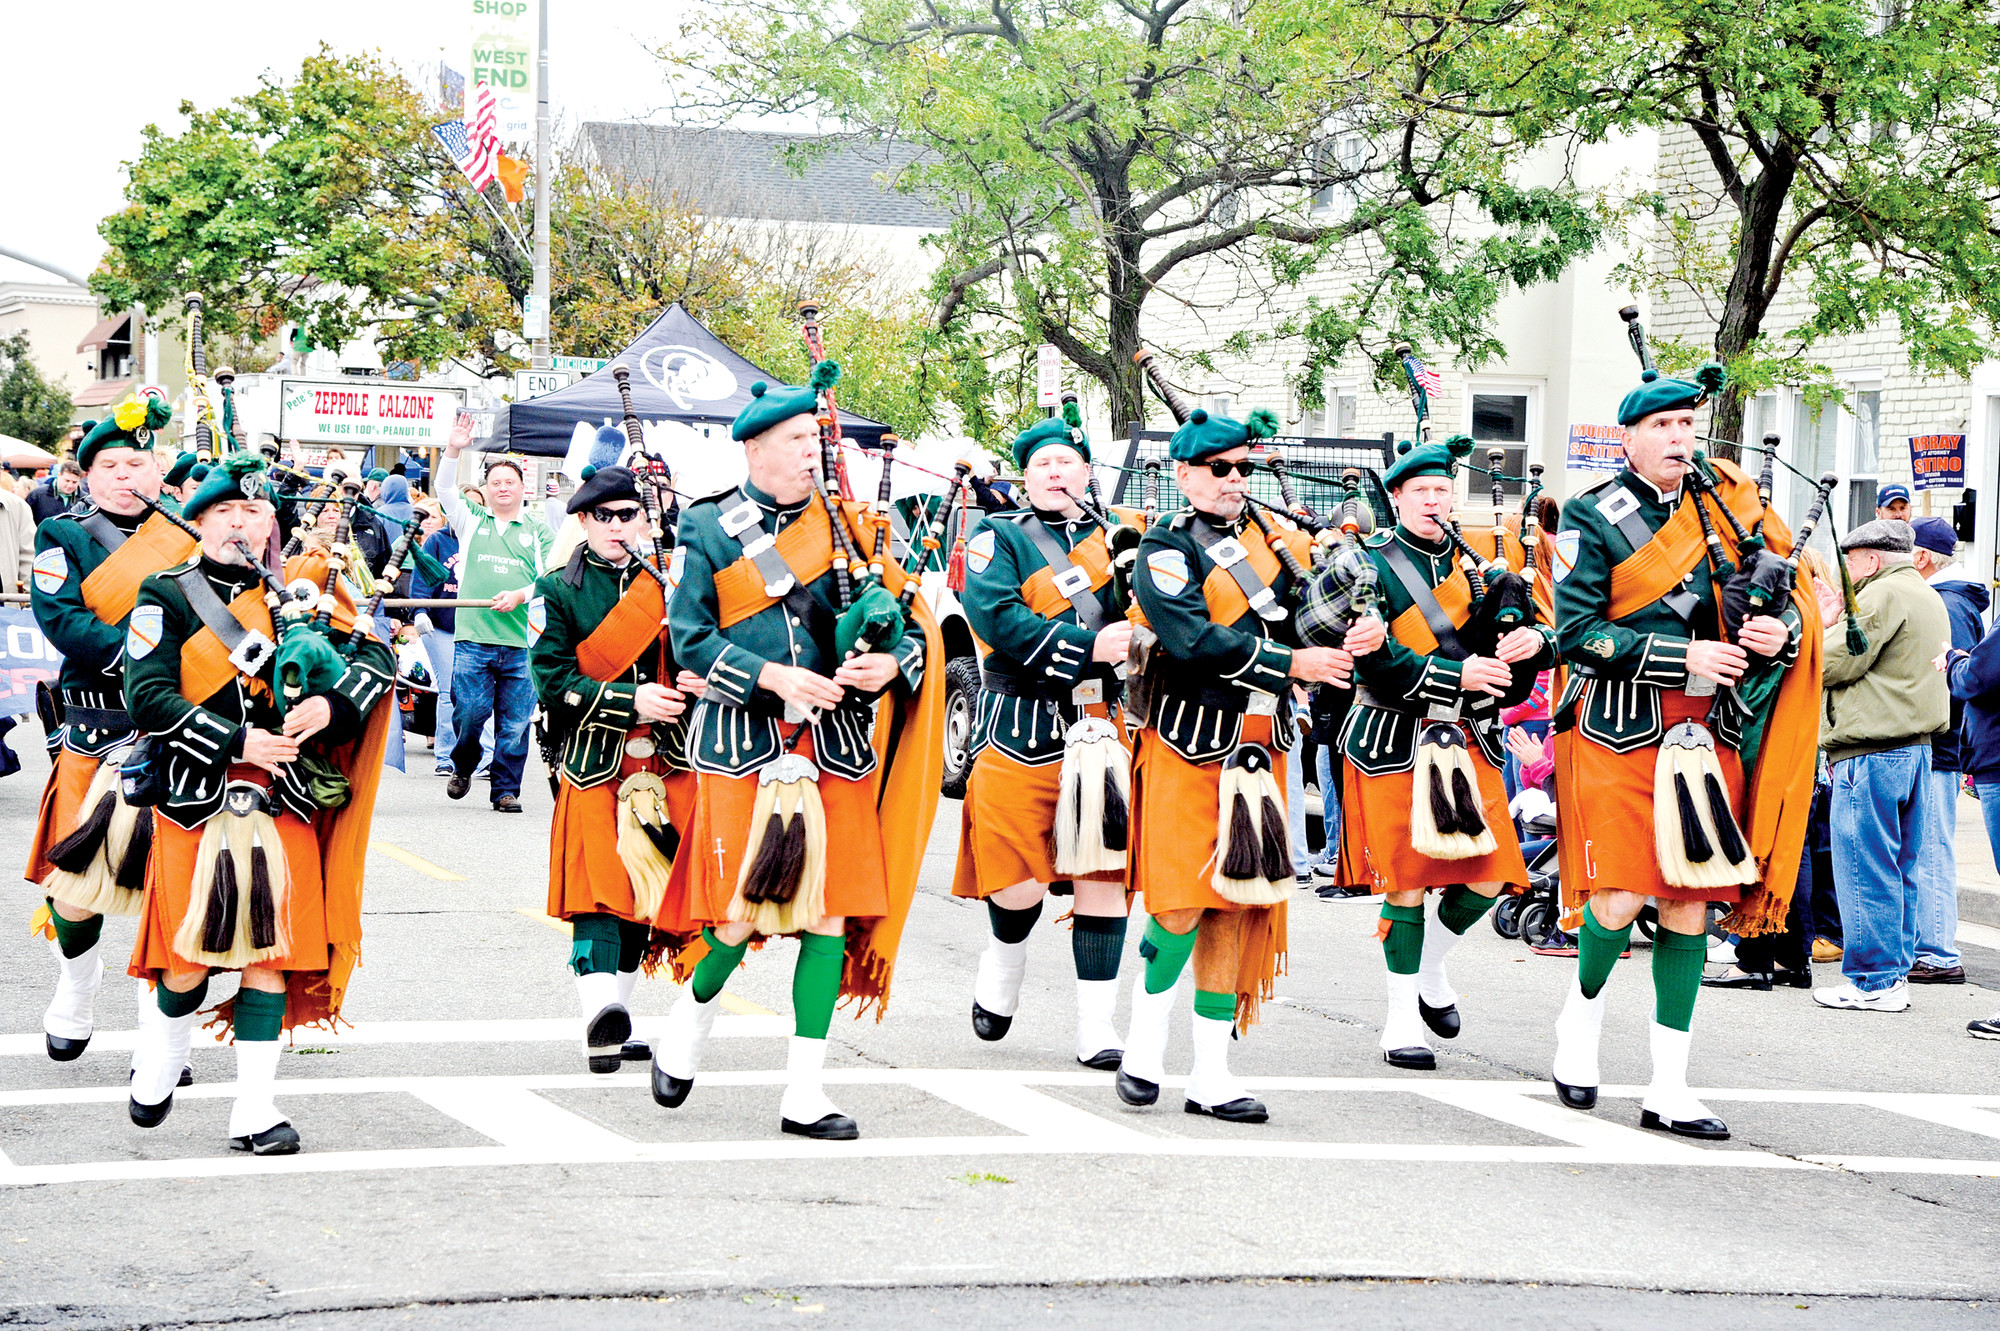 New York State Courts Pipe and Drums were among the many bands and organizations that marched in the parade last Saturday.